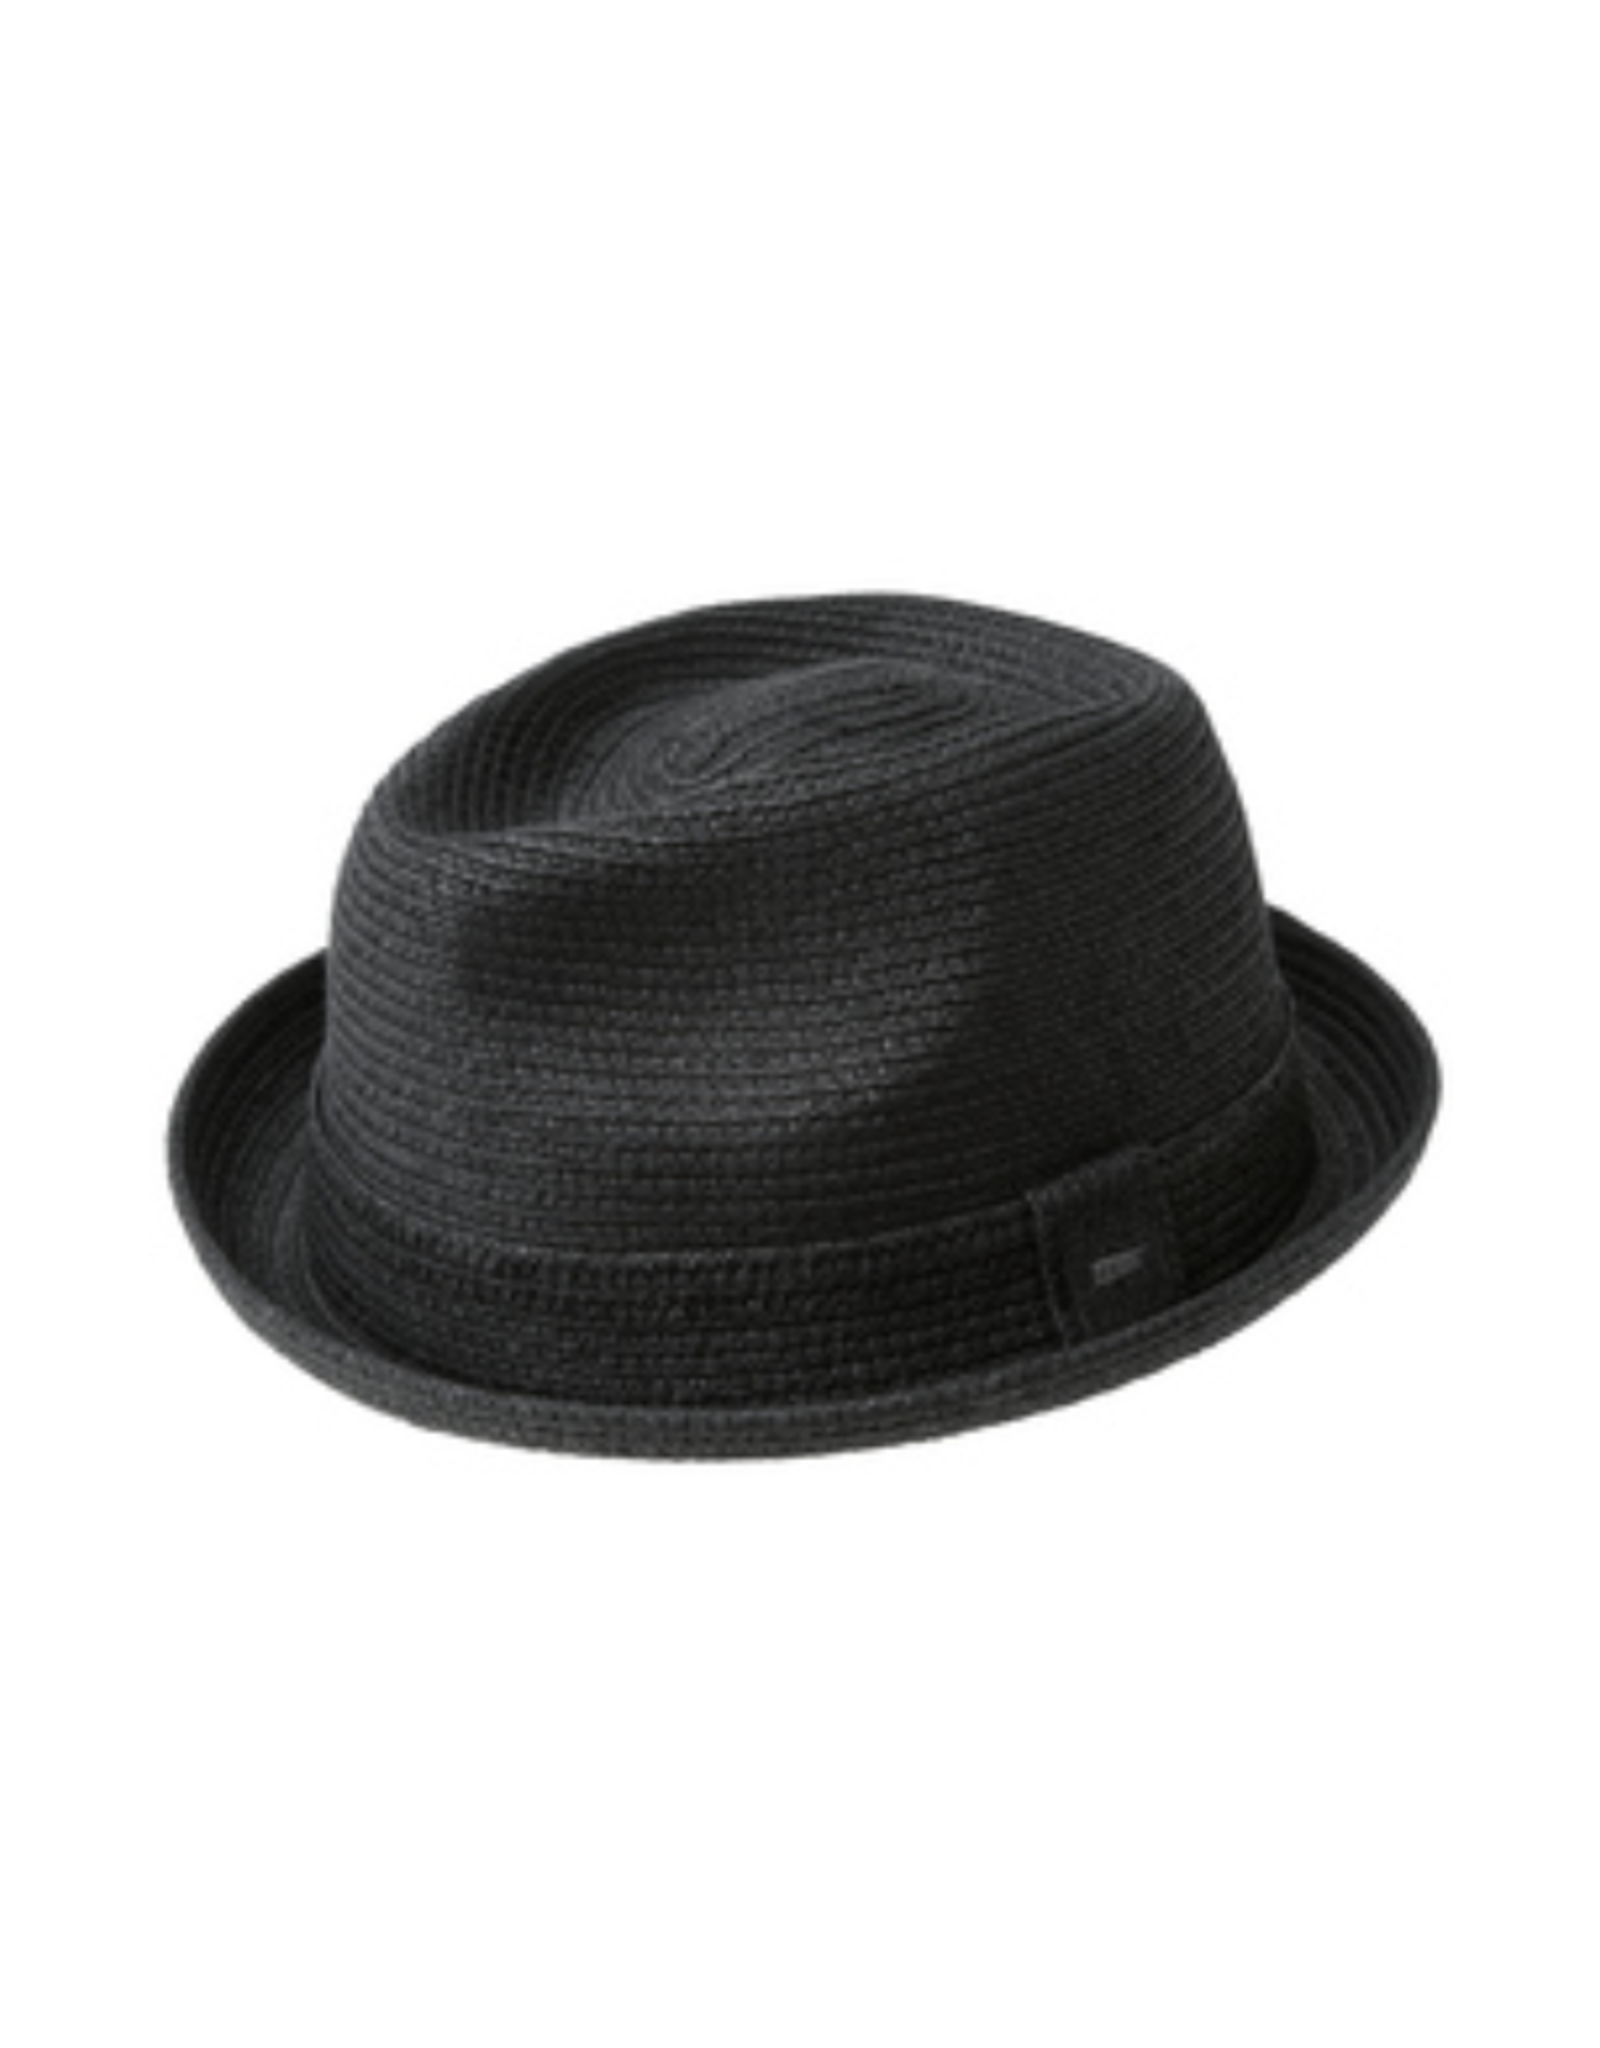 Bailey Hat Co. HAT-TURNED UP BRIM "BILLY"